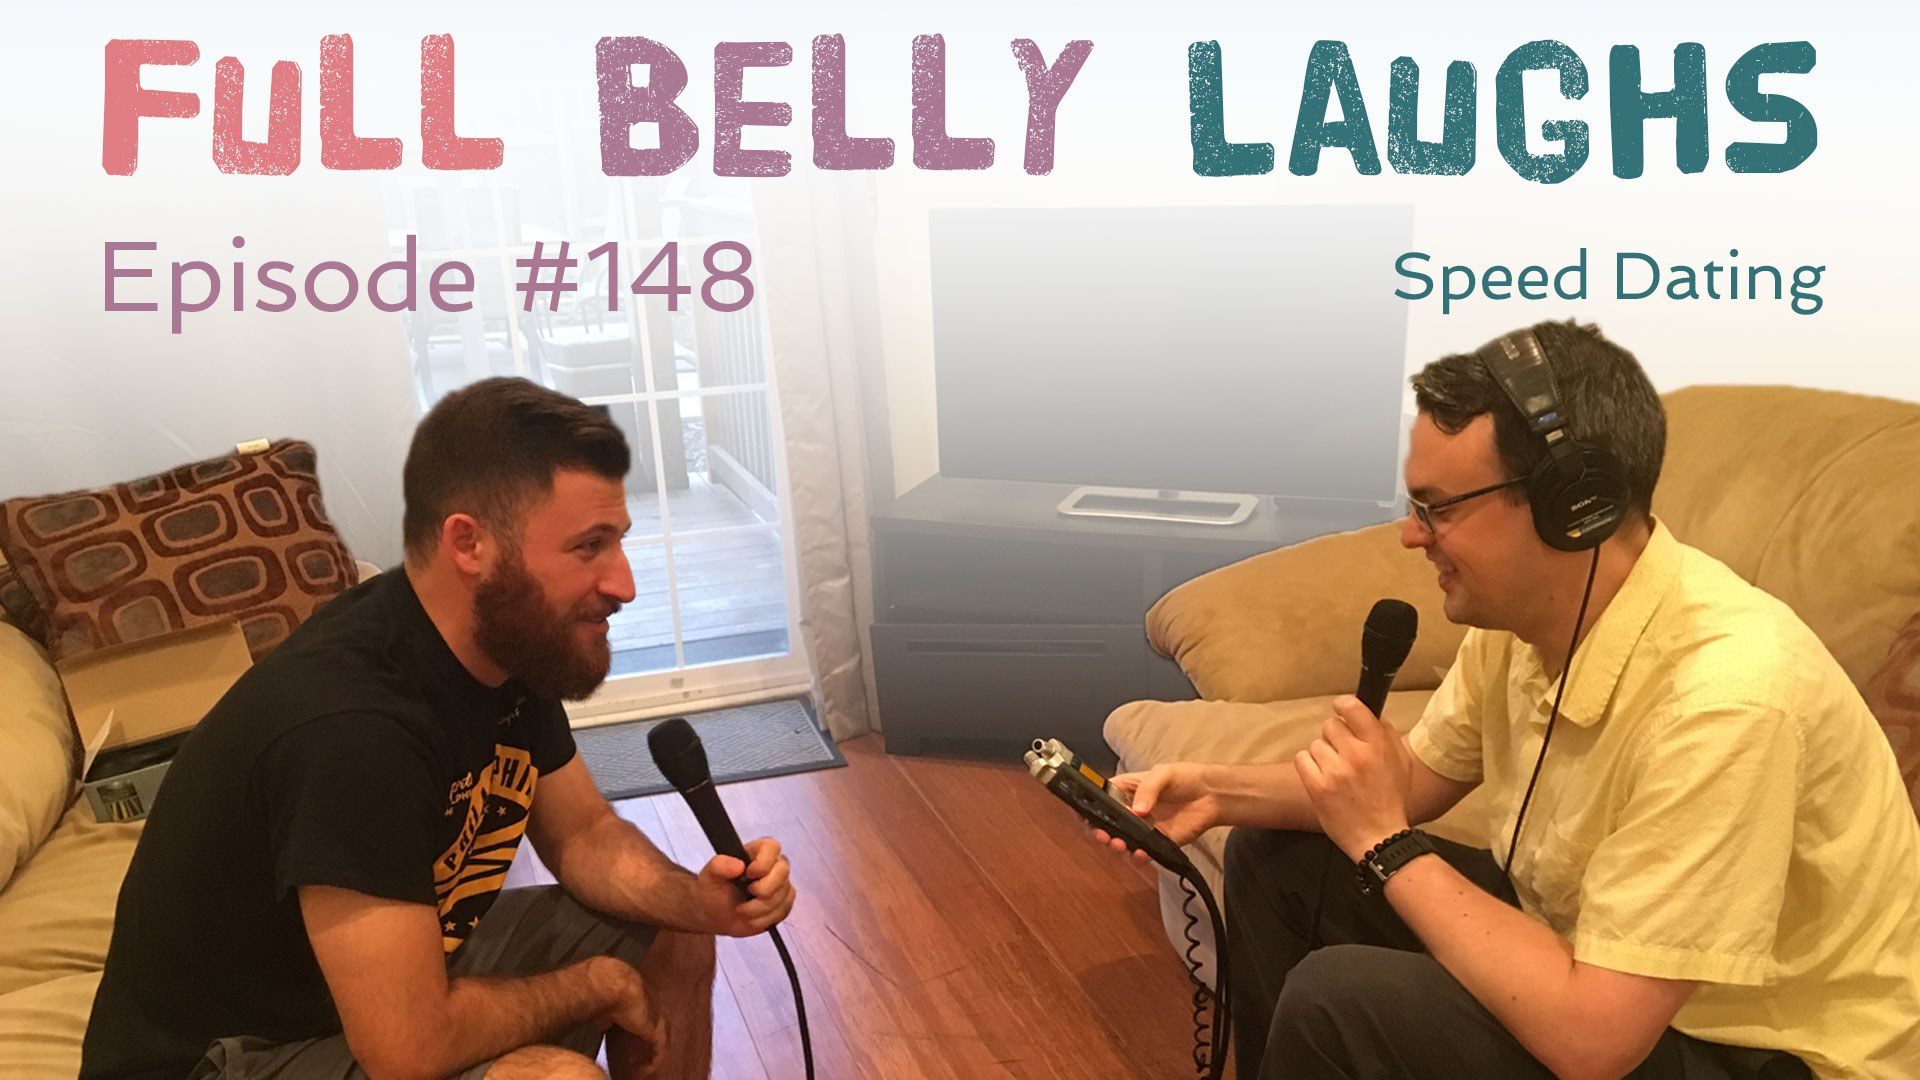 full belly laughs podcast episode 148 speed dating with luke cucurullo audio artwork